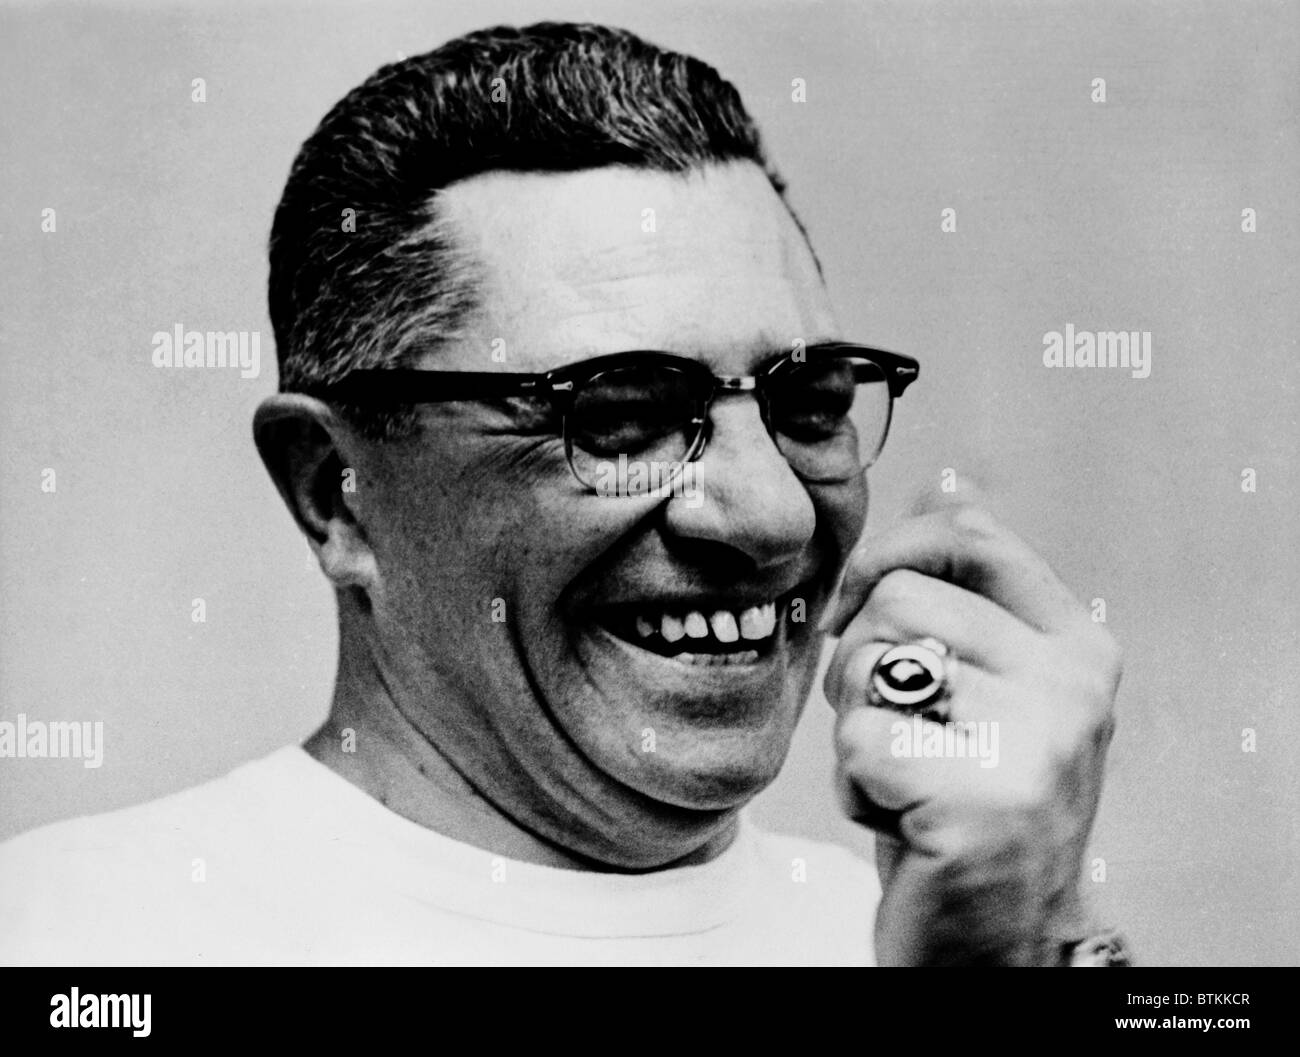 Vince Lombardi (1913-1970), coach of the Green Bay Packers, football team, in 1967. Stock Photo